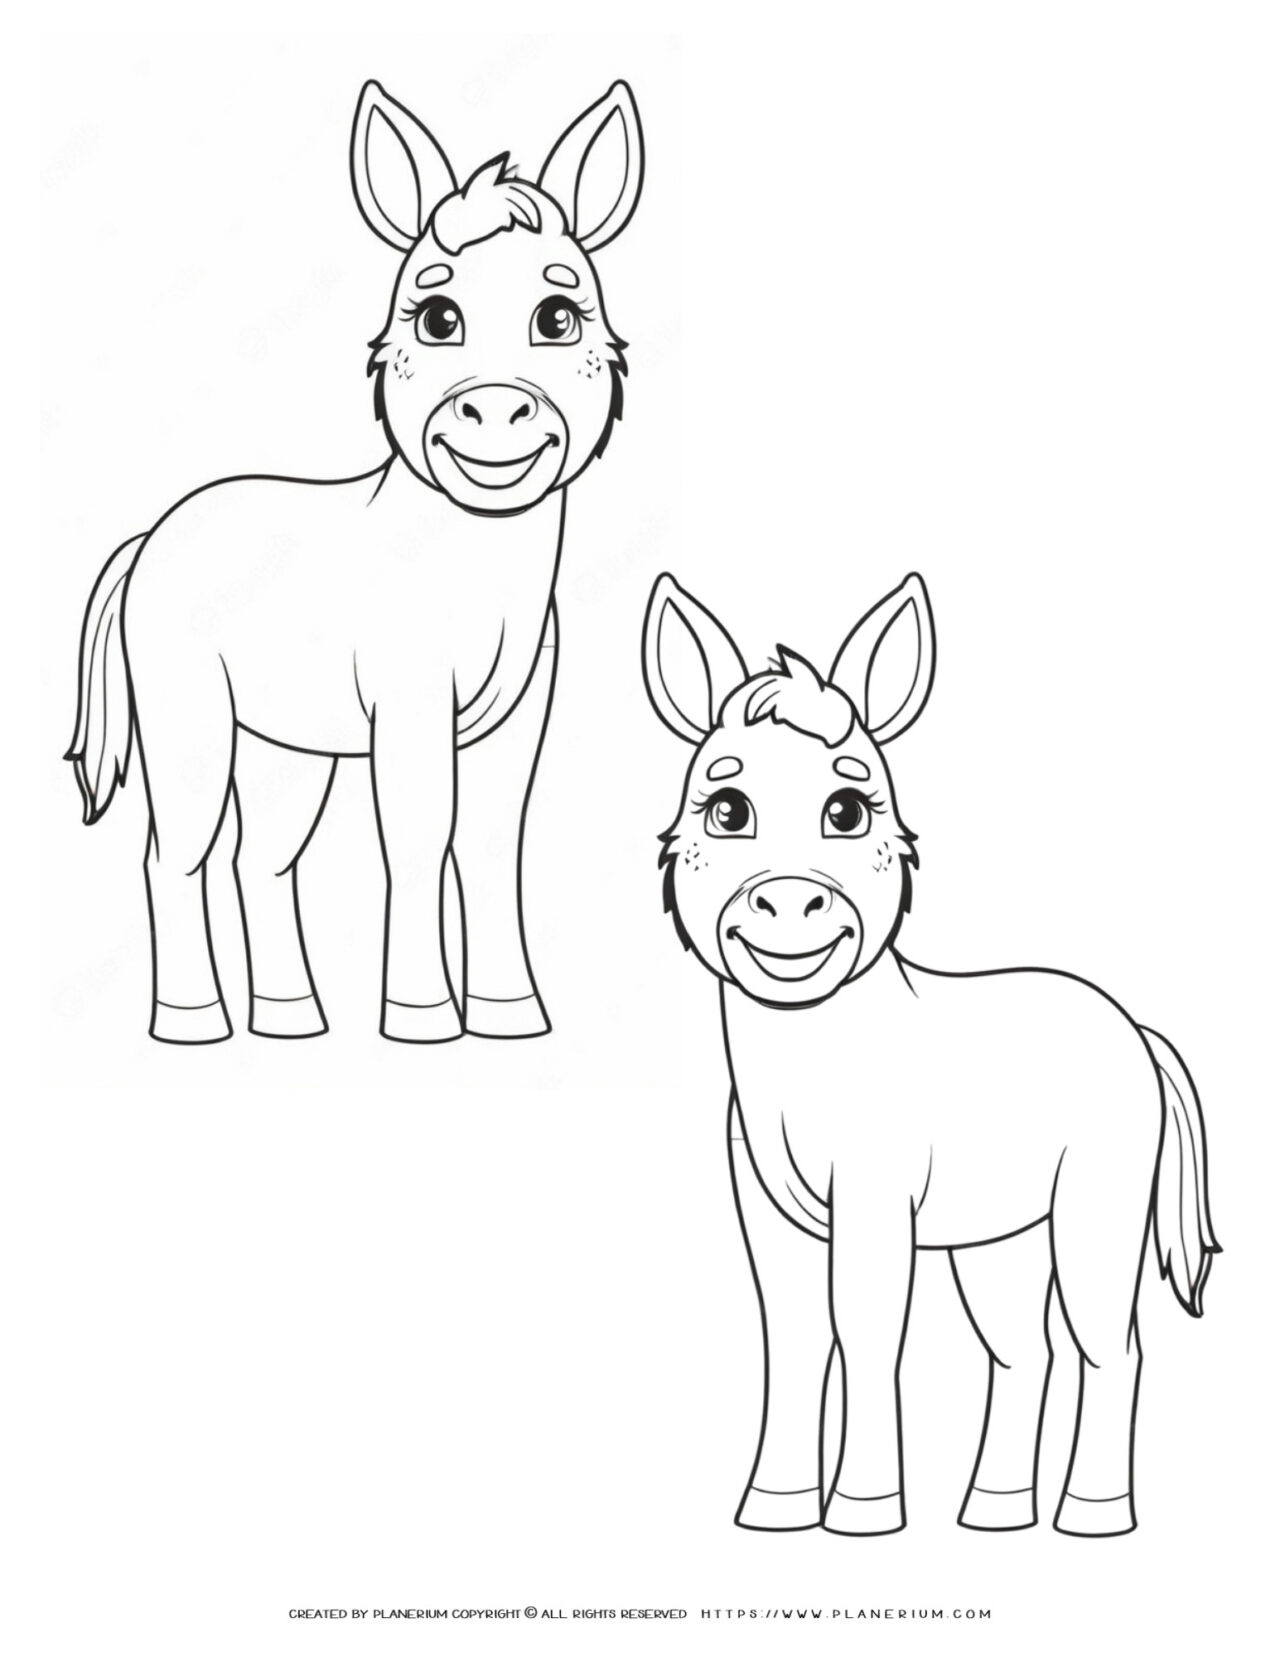 Two-Cute-Donkeys-Outlines-Standing-Simple-Coloring-Page-for-Kids